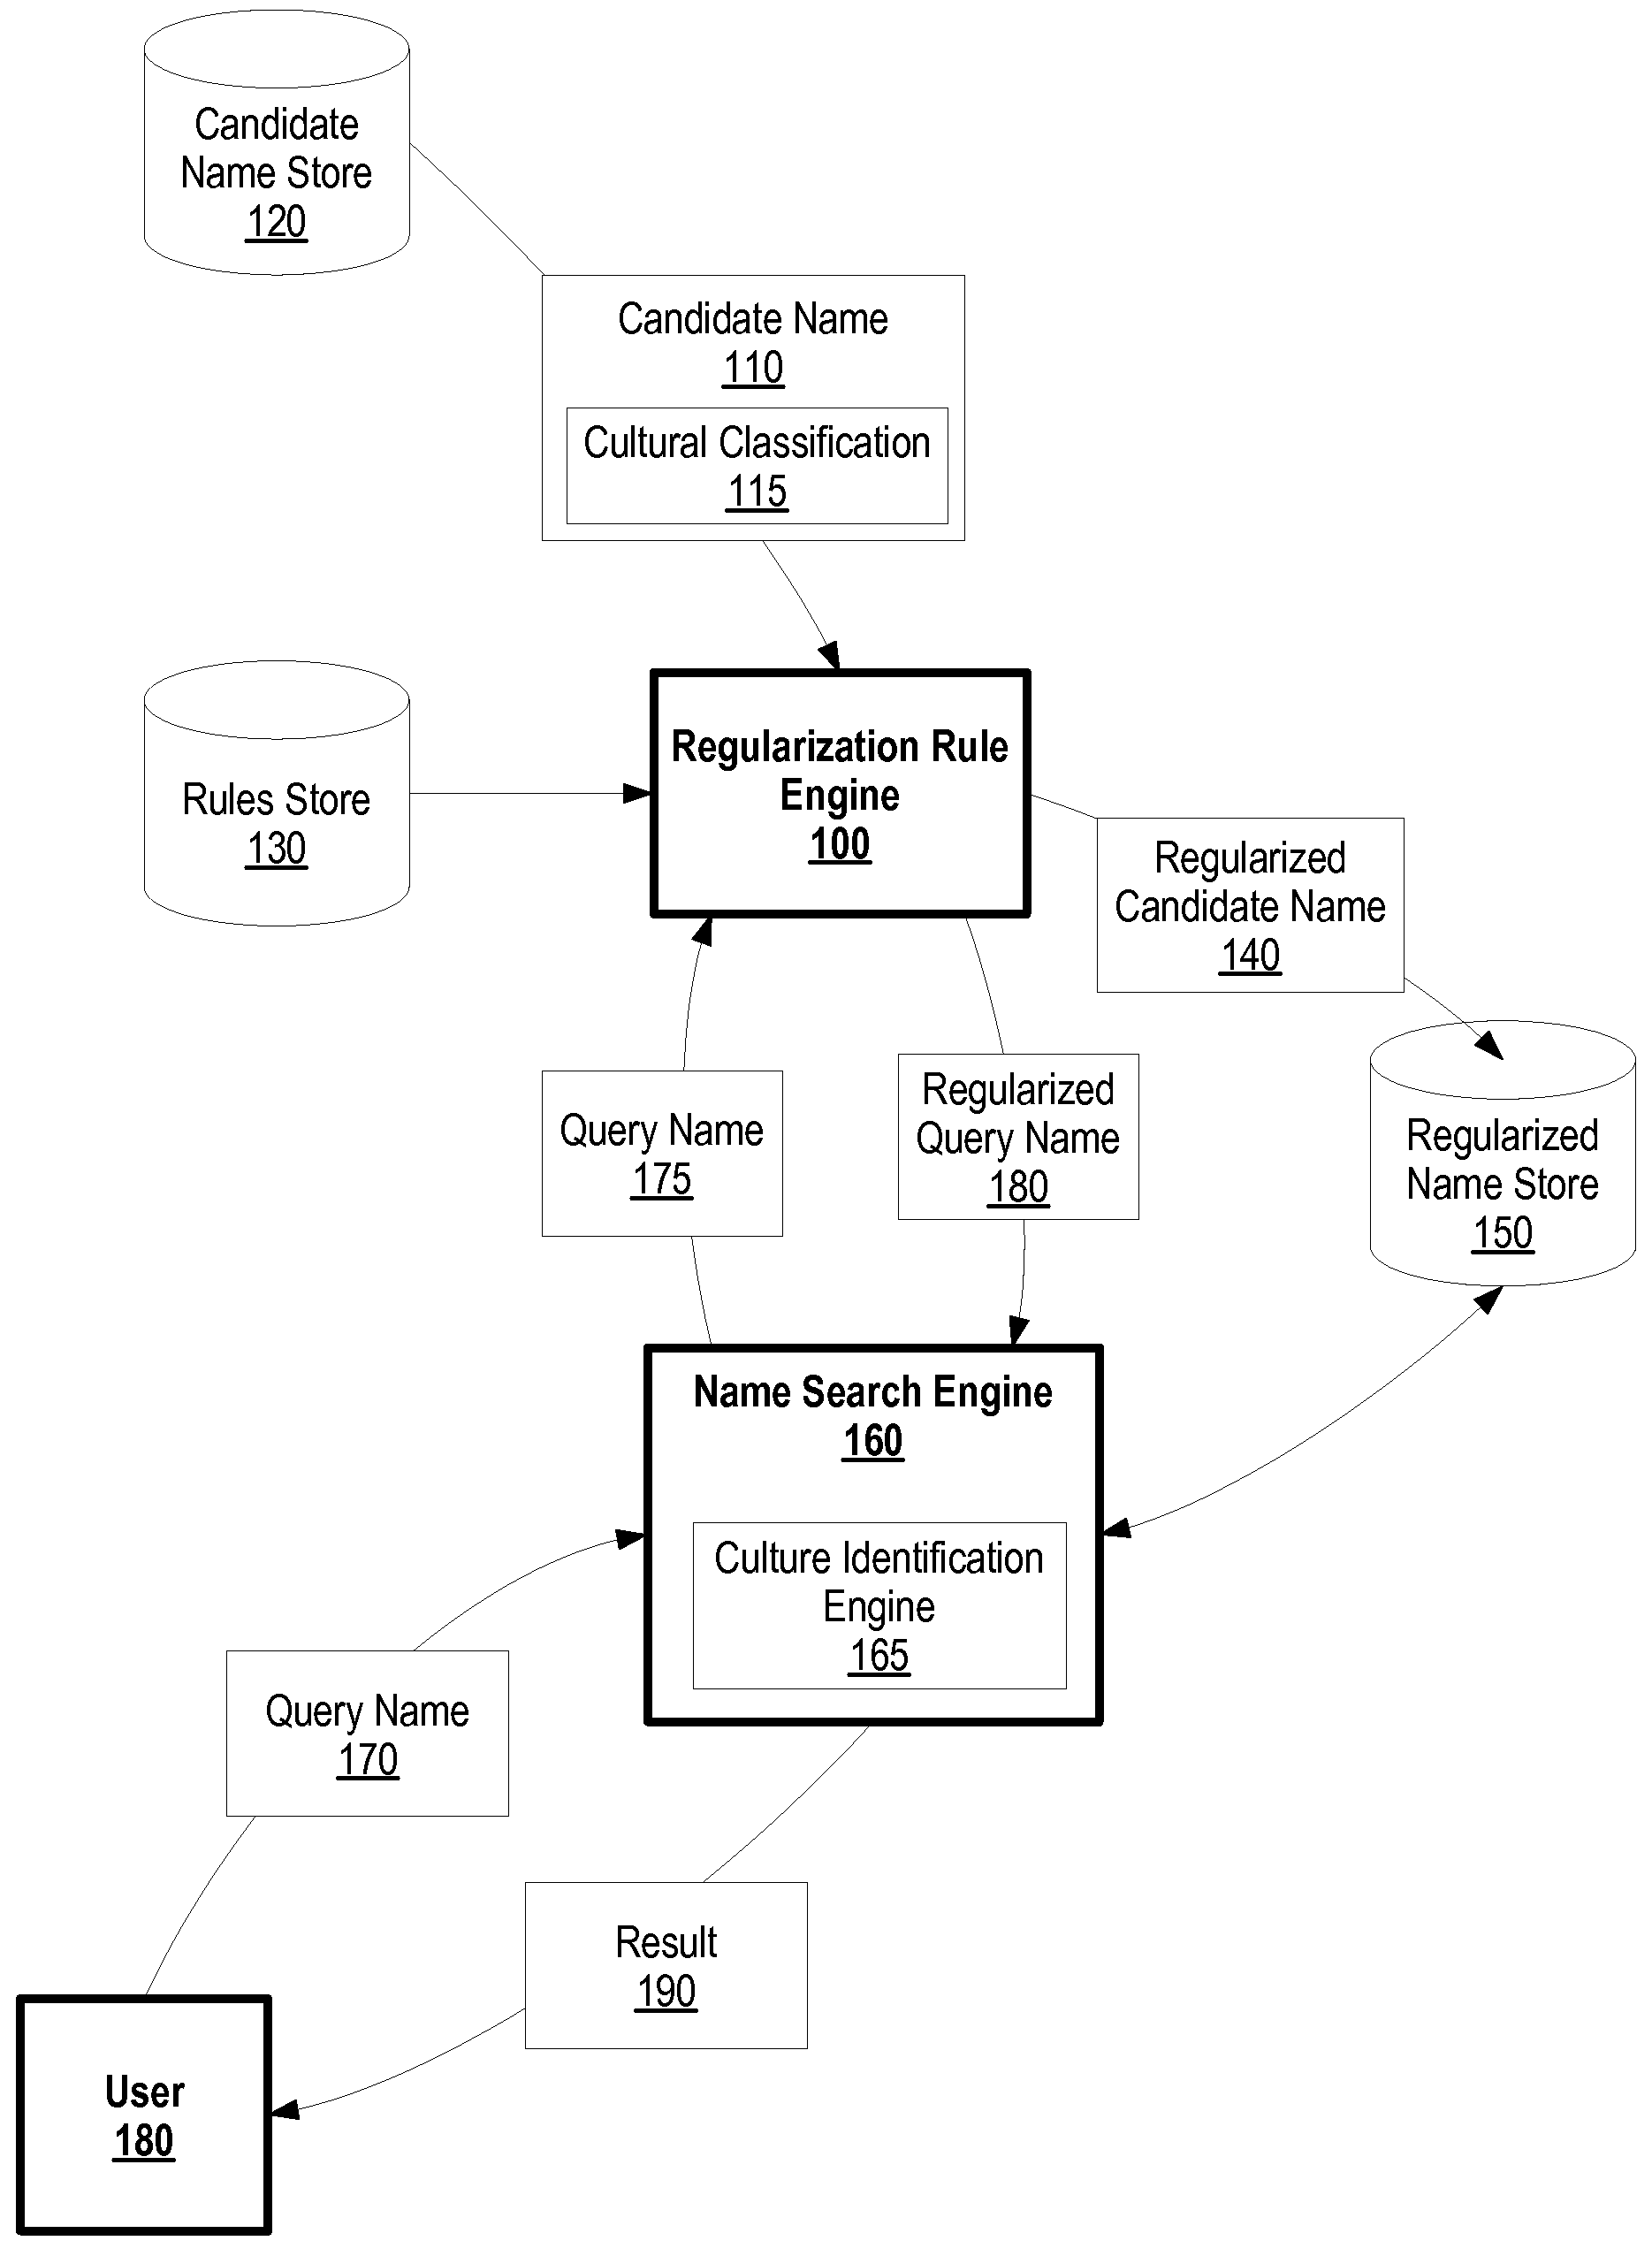 System and method for improved name matching using regularized name forms